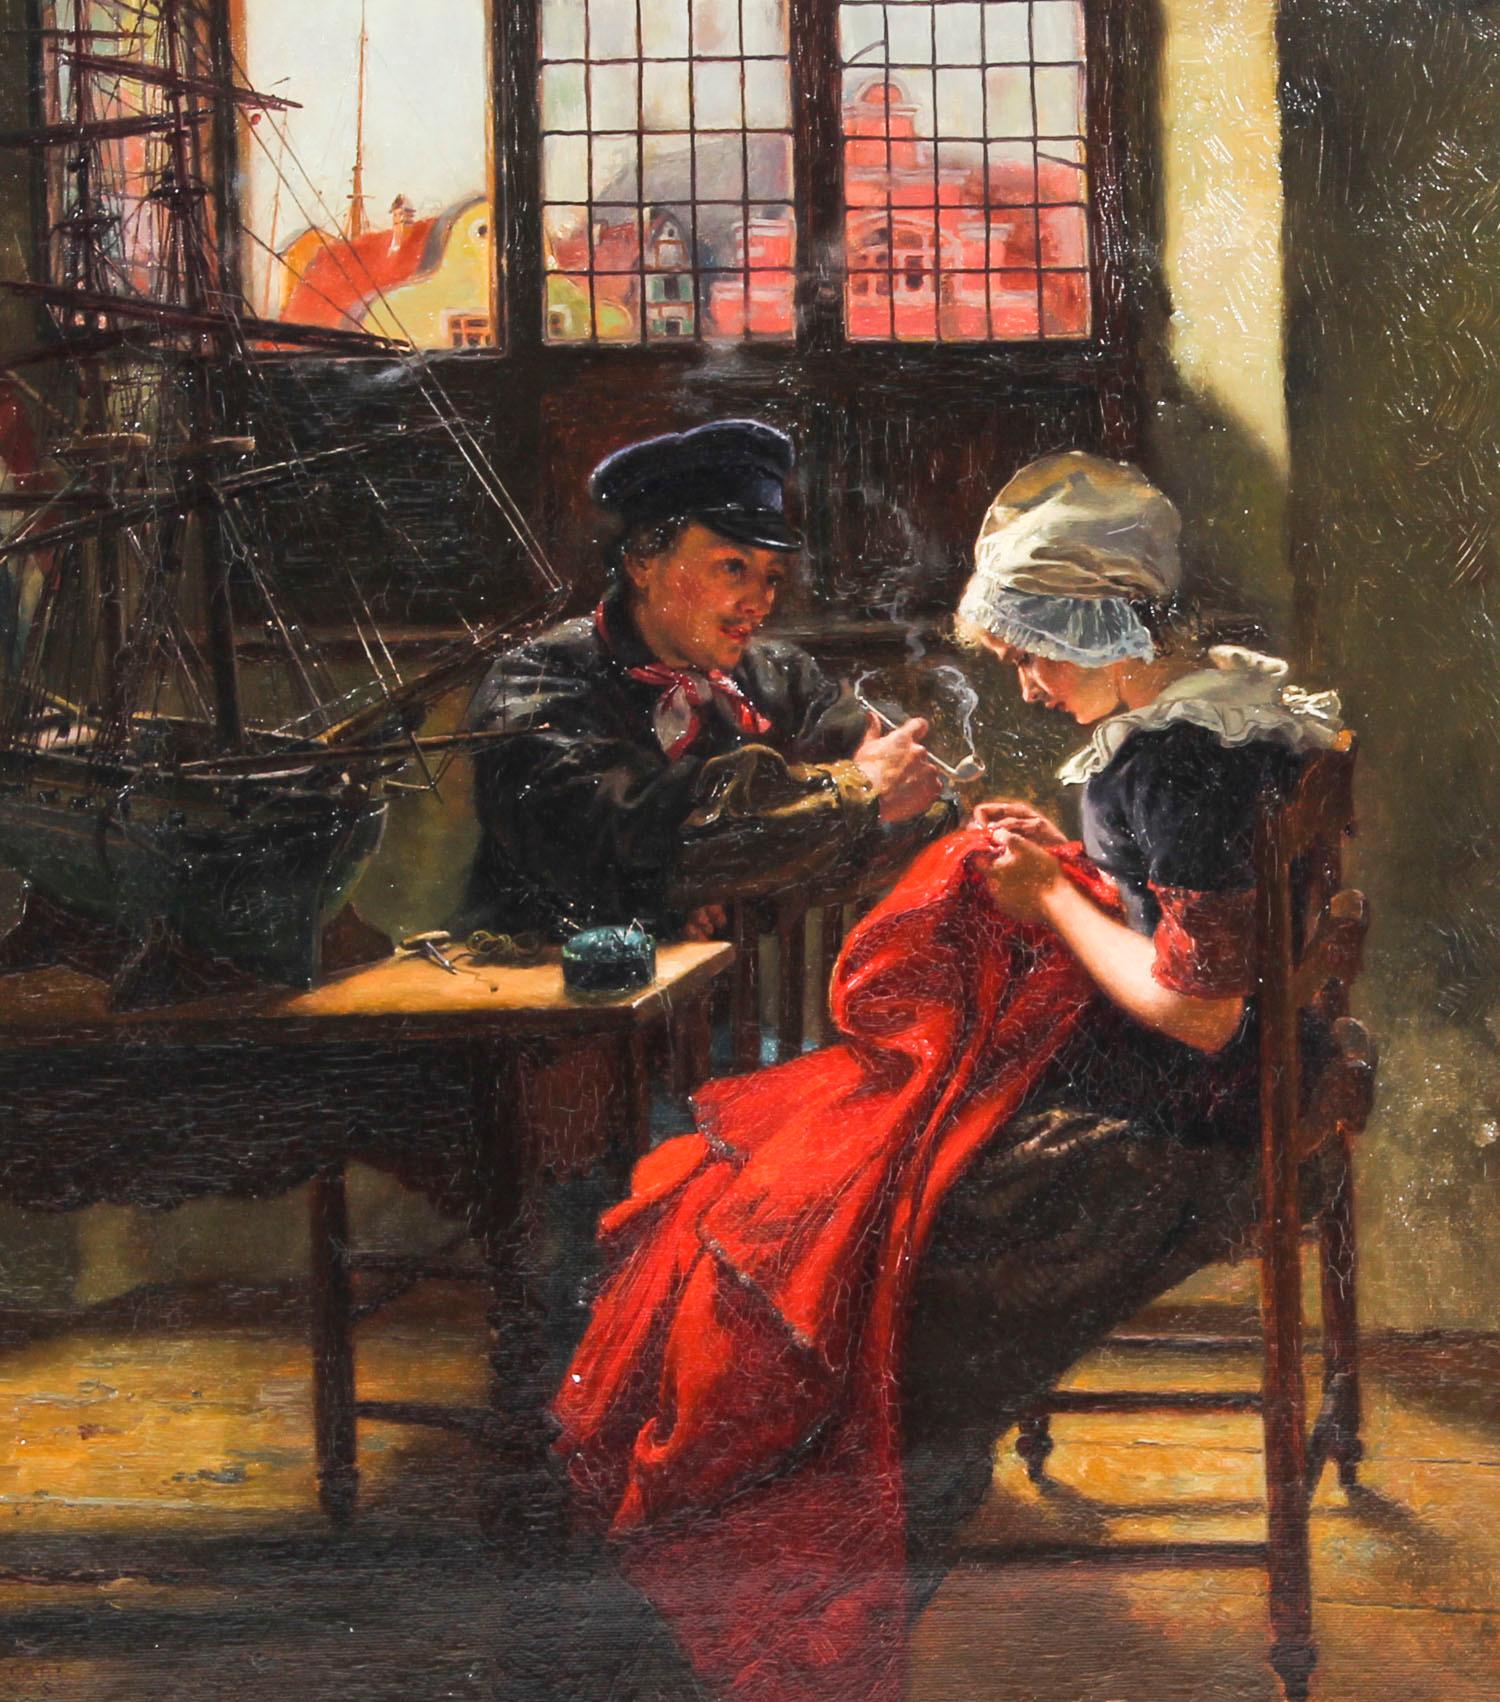 This is a beautiful antique oil on canvas painting by the renowned German artist Carl Leopold Voss (1856 -1921) dating from the 19th century and signed lower right.

The painting is of a young couple dressed in 19th-century attire sitting in a